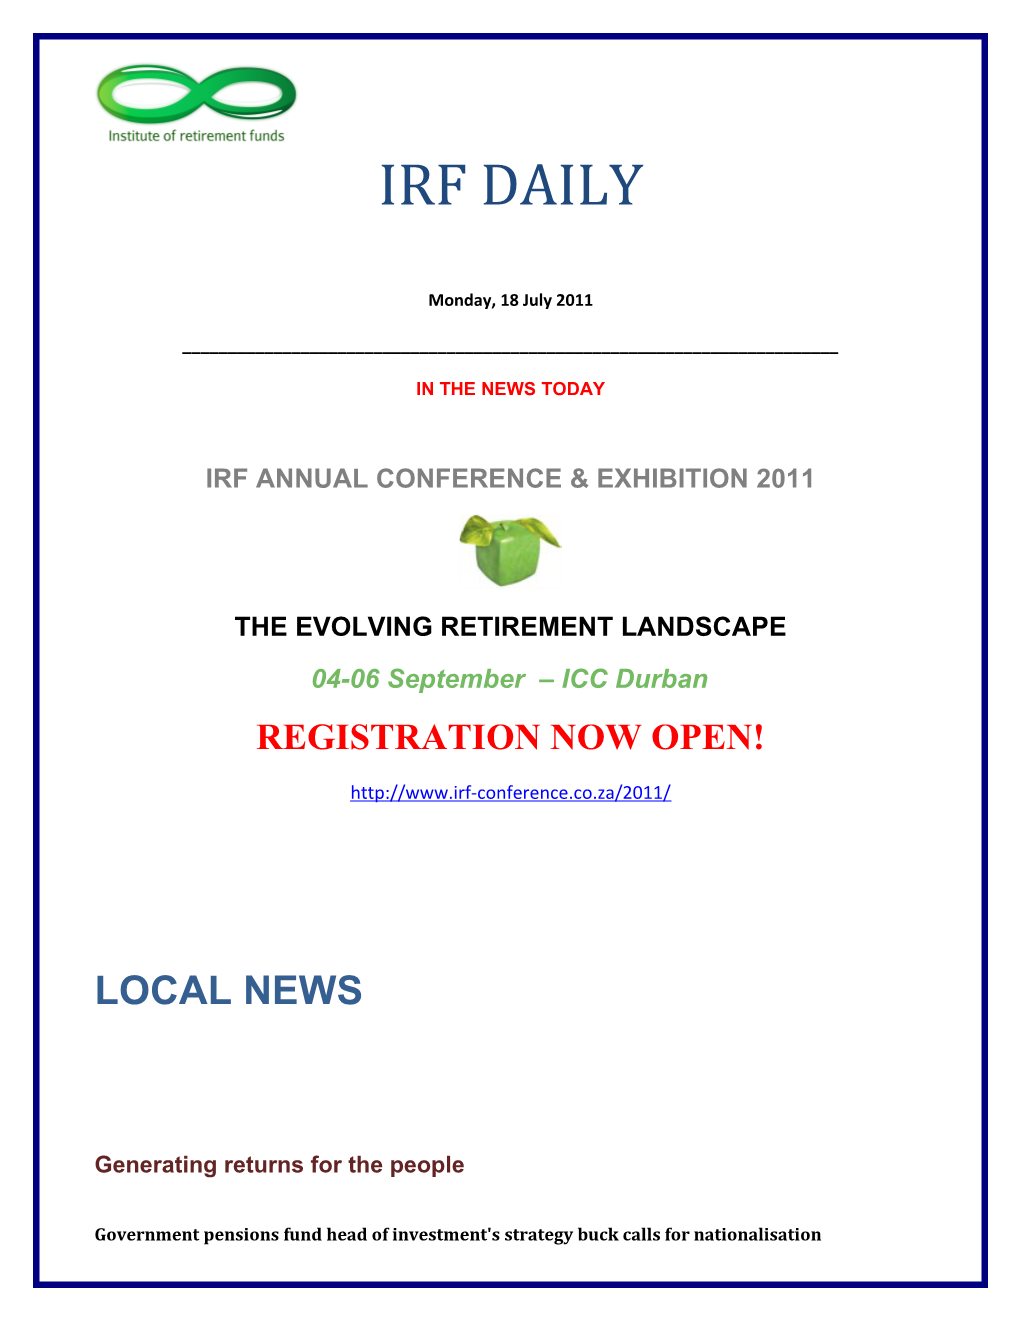 Irf Annual Conference & Exhibition 2011